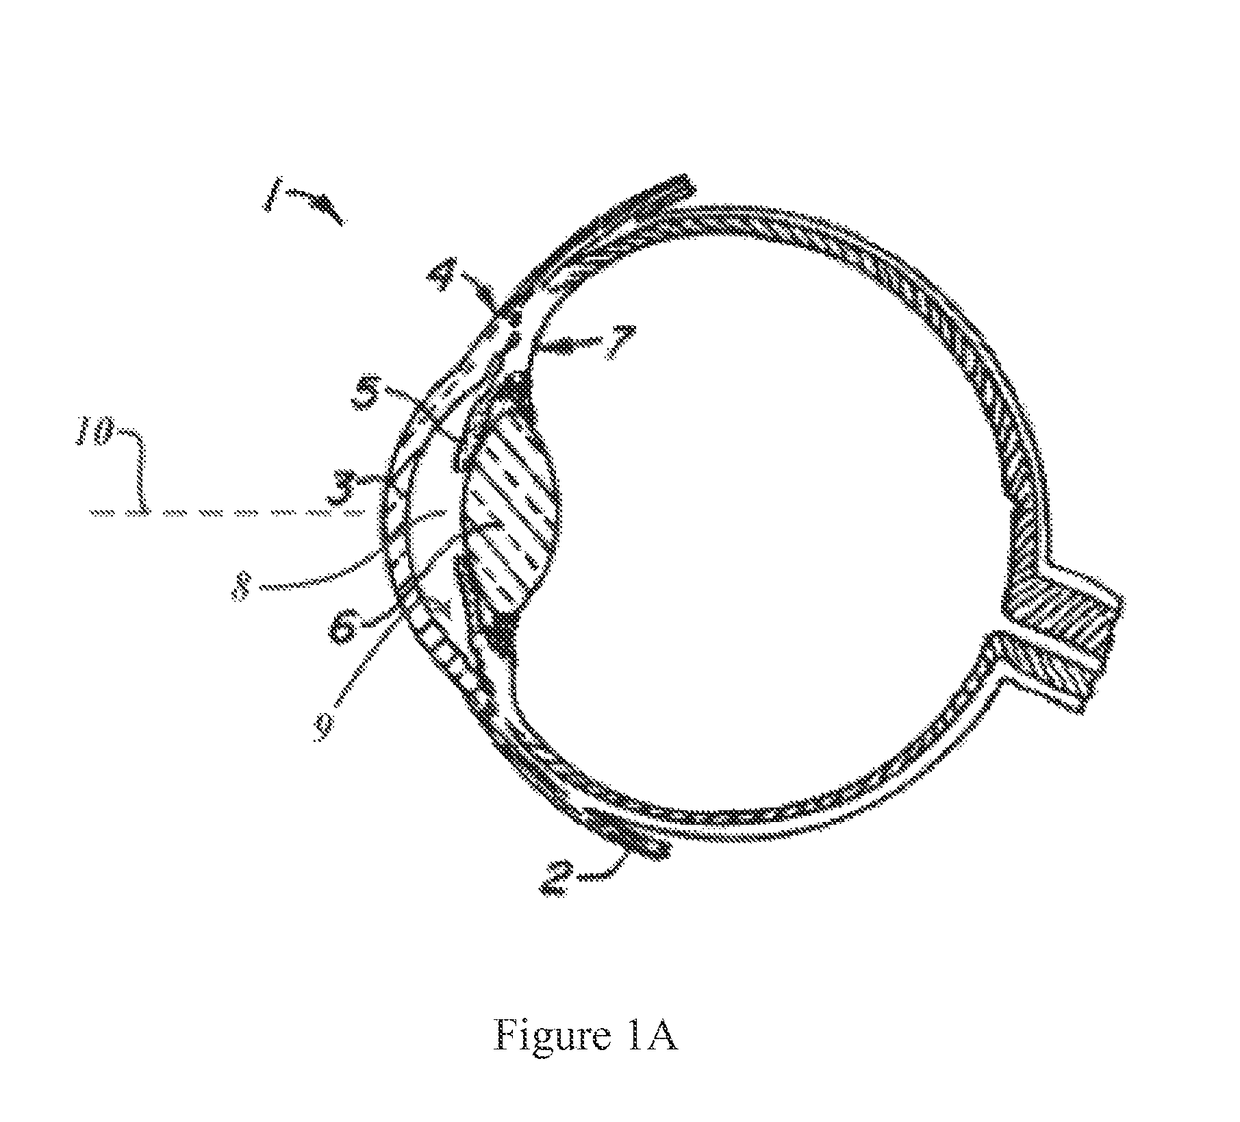 Convex contact probe for the delivery of laser energy